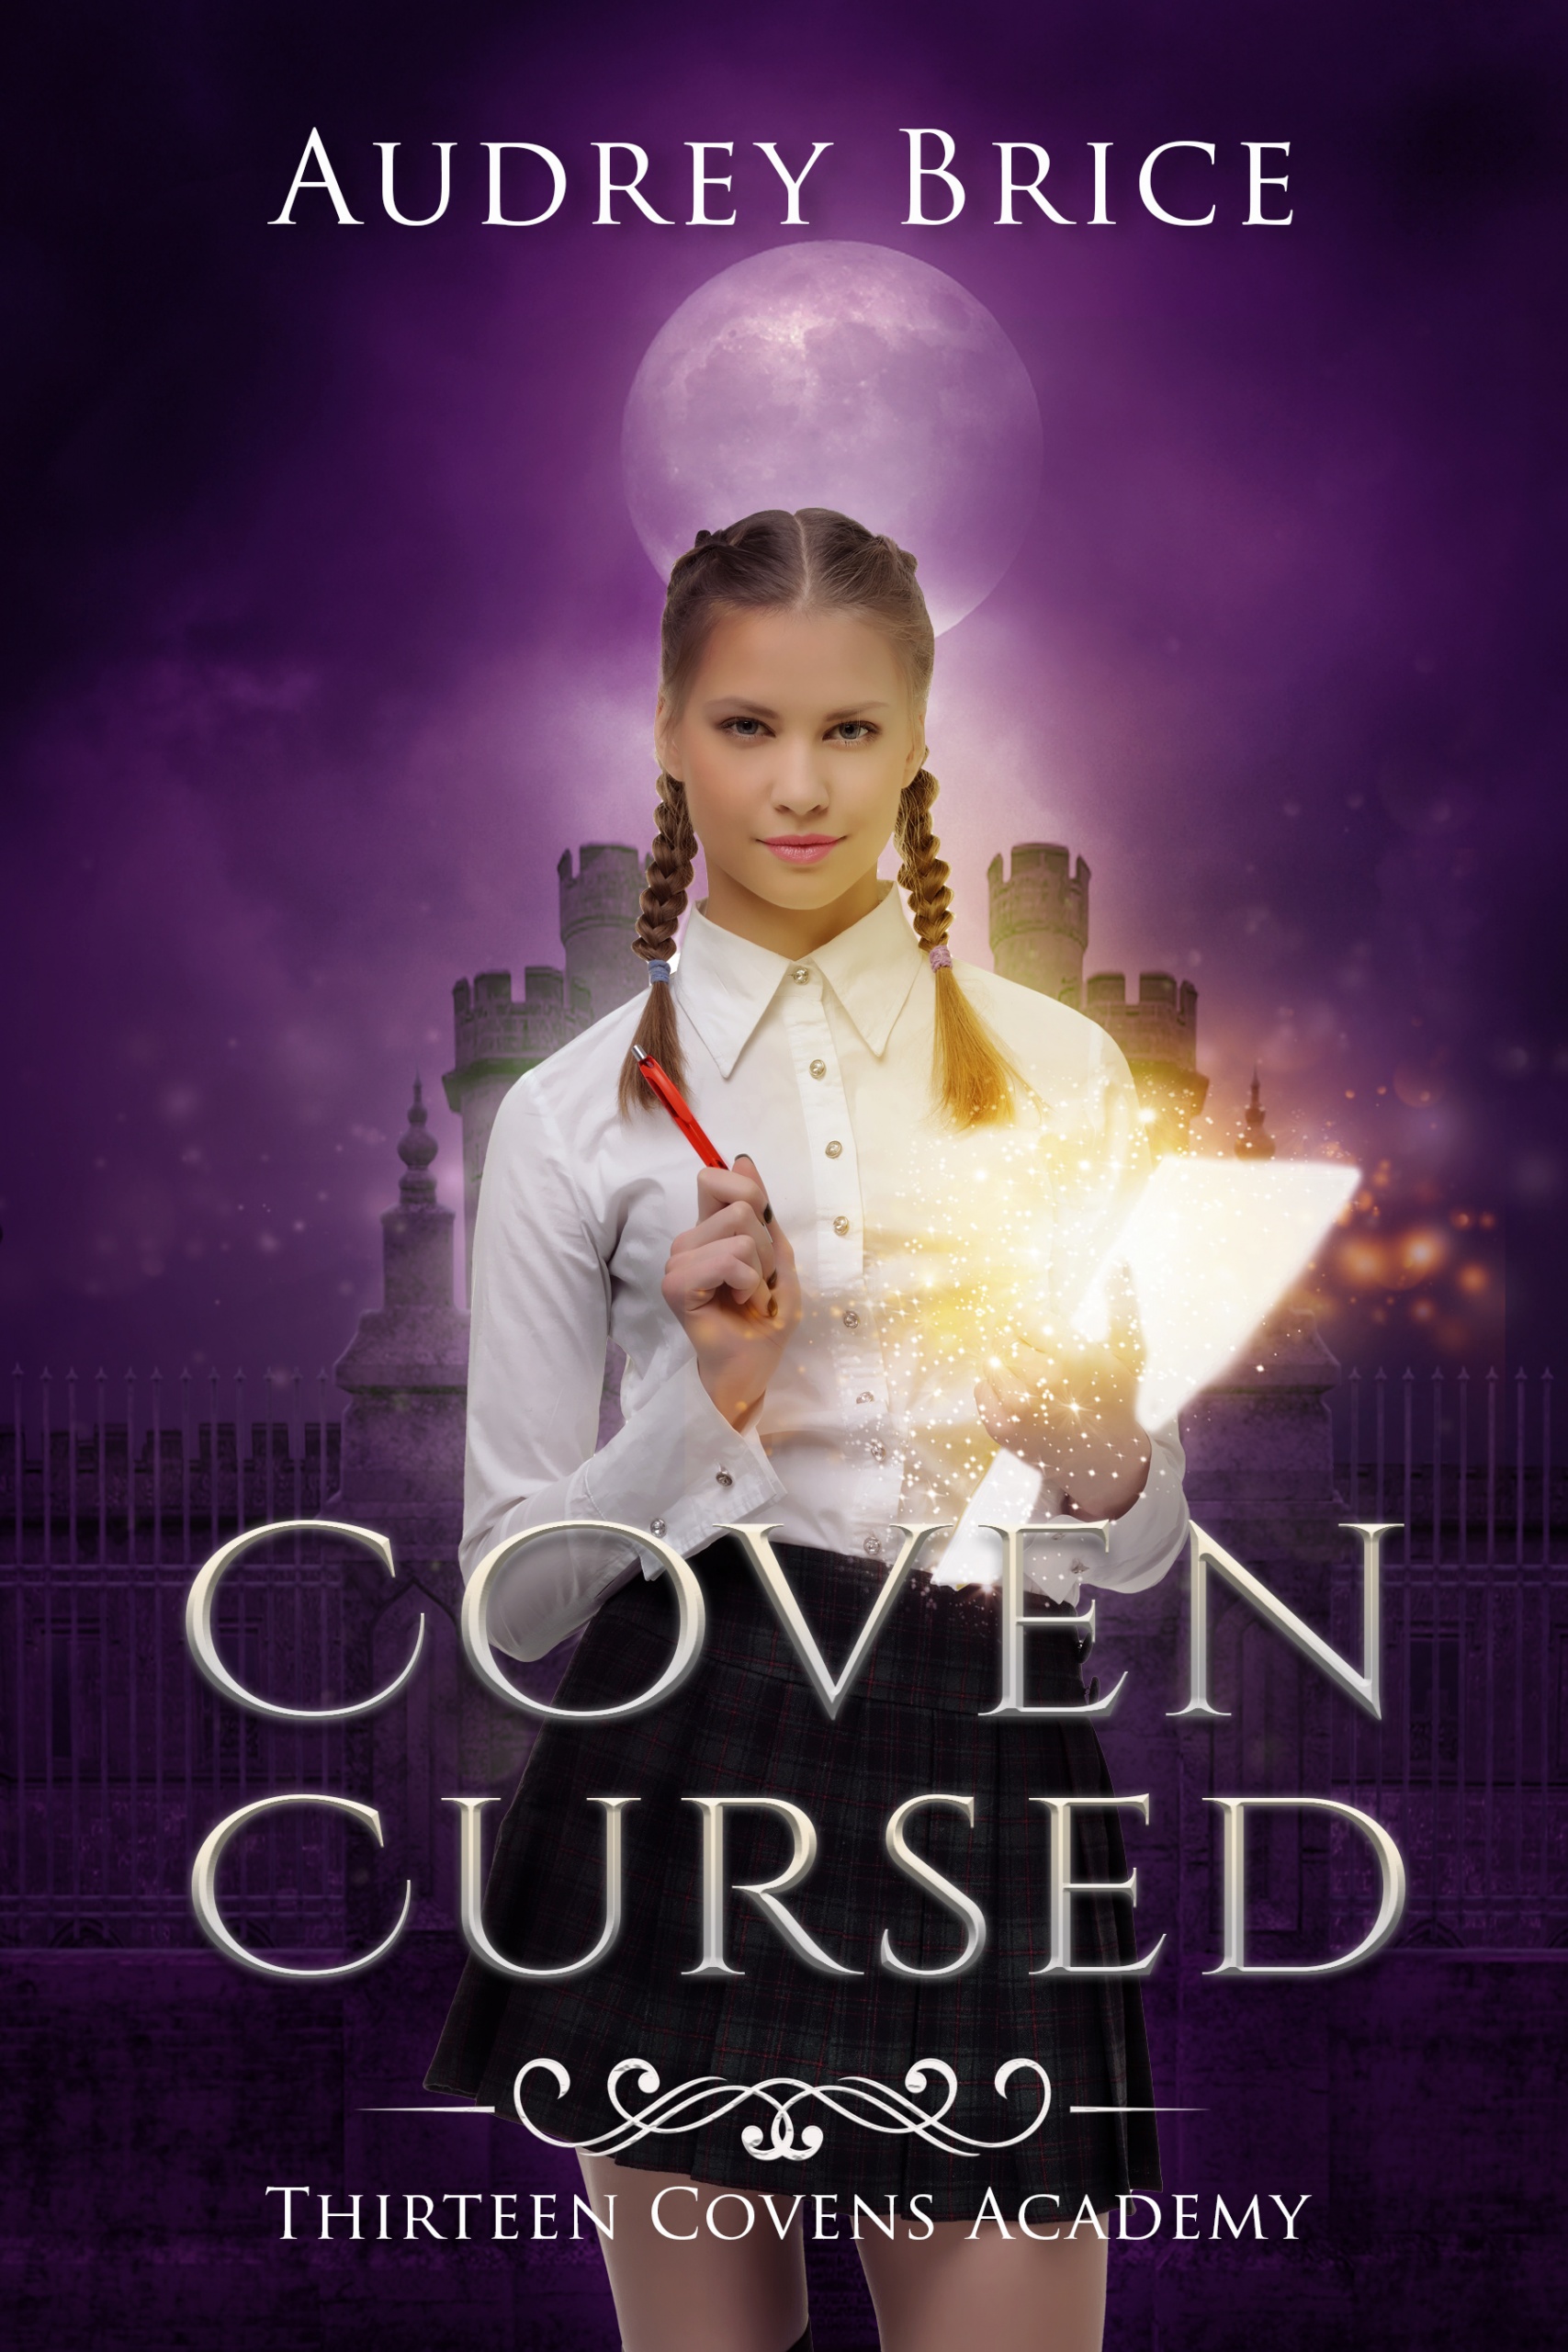 Coven Cursed